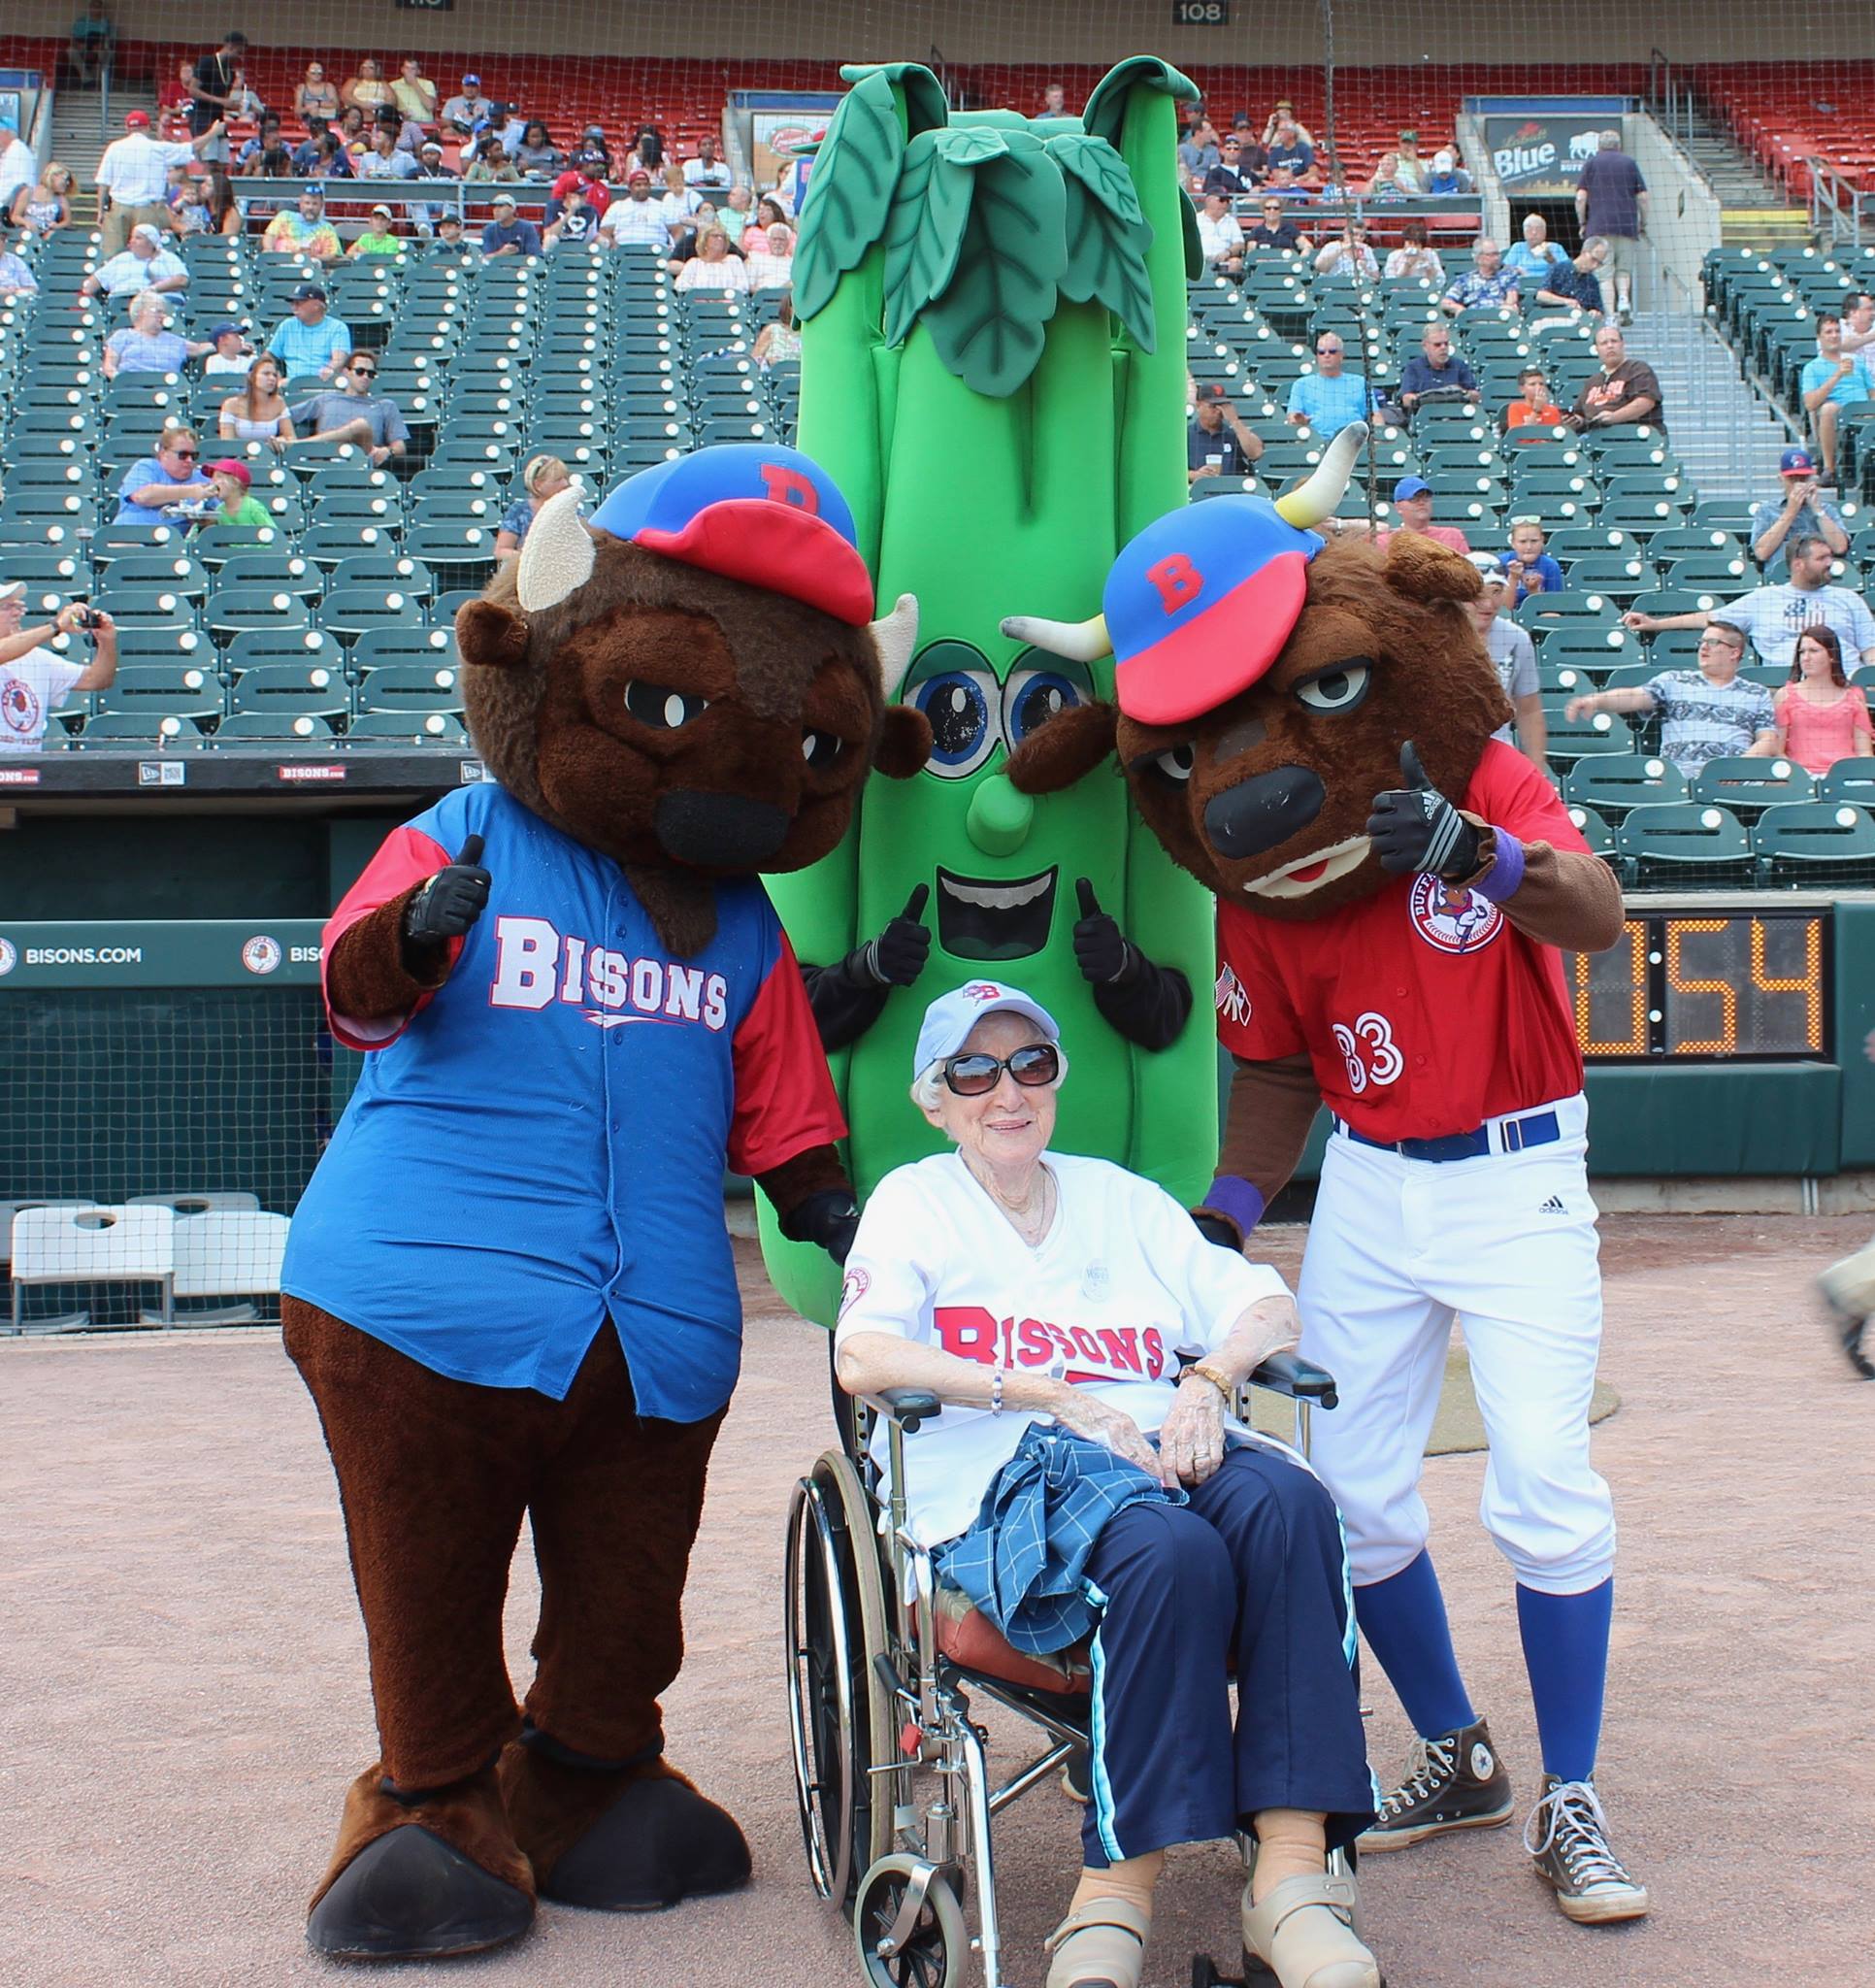 An opportunity to throw out the first pitch for Florence! Image